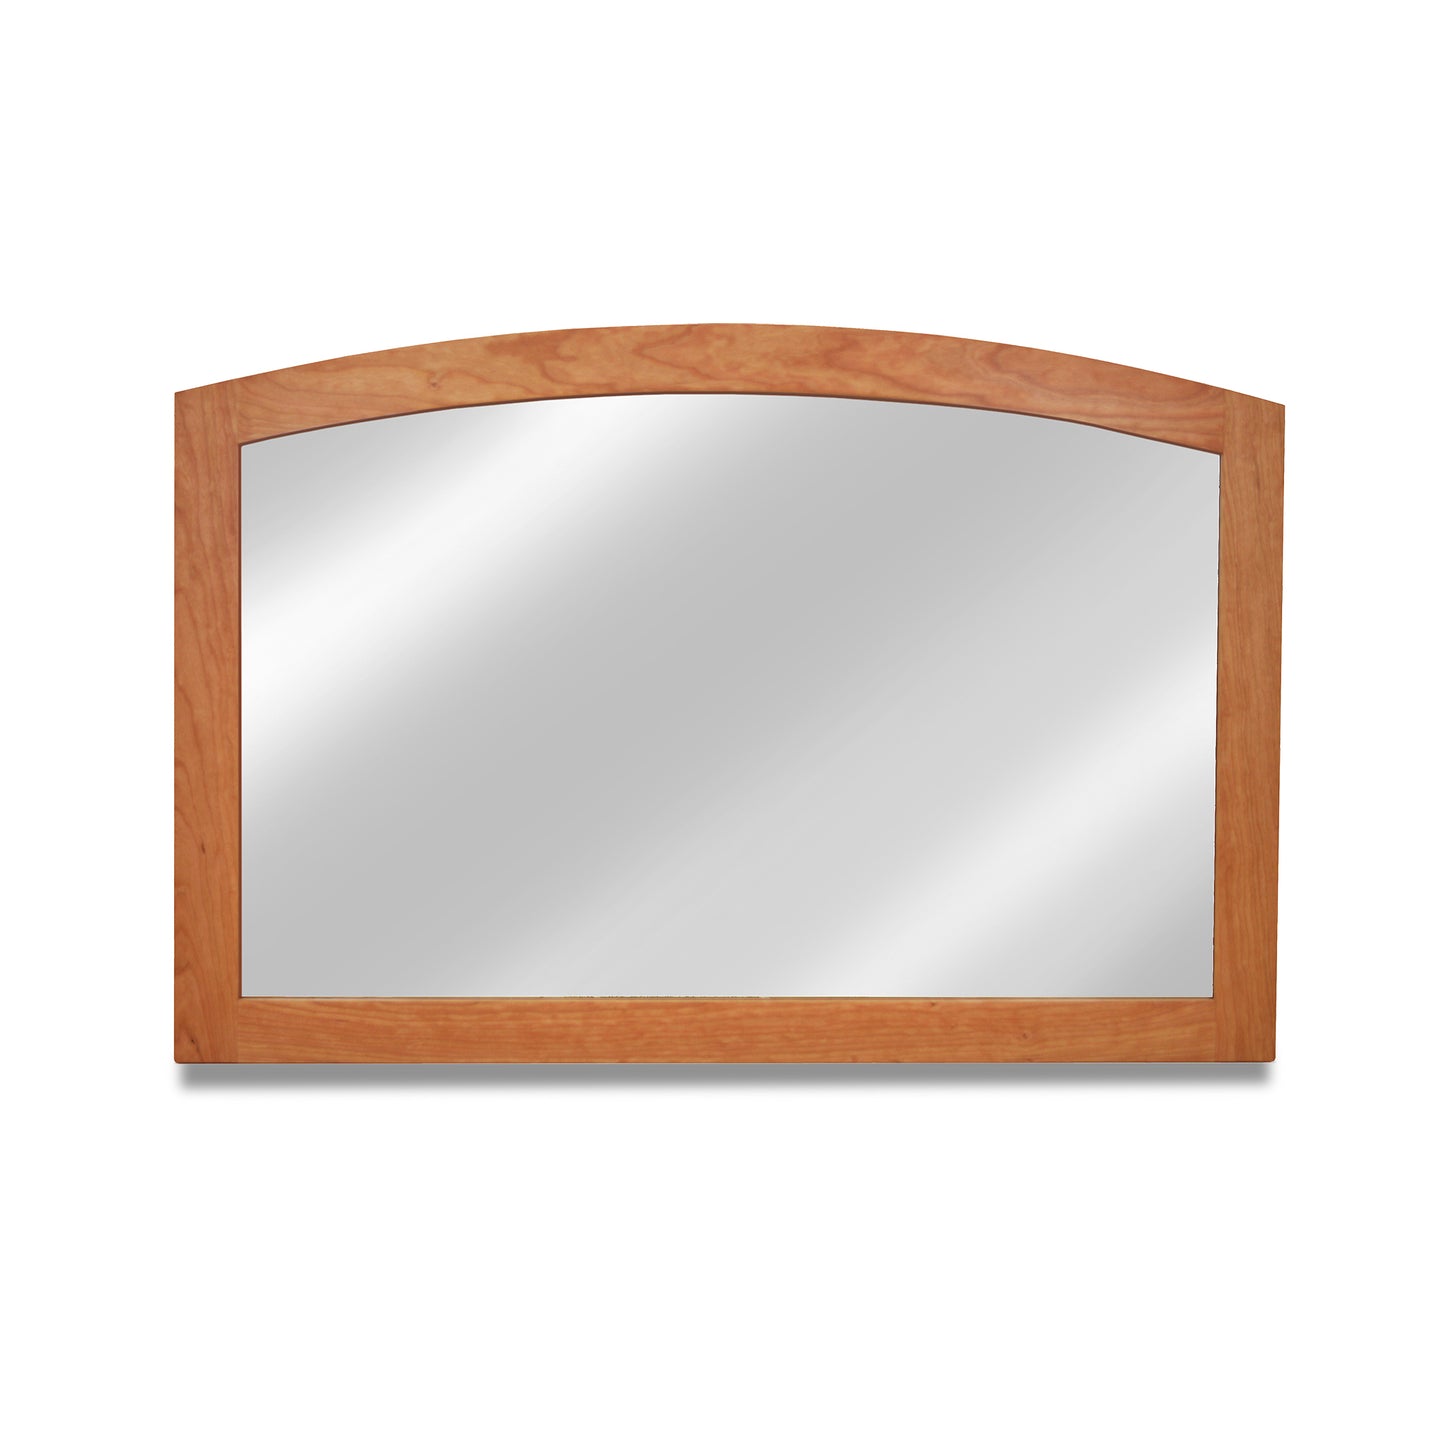 A Maple Corner Woodworks American Shaker Arched Mirror isolated on a white background.